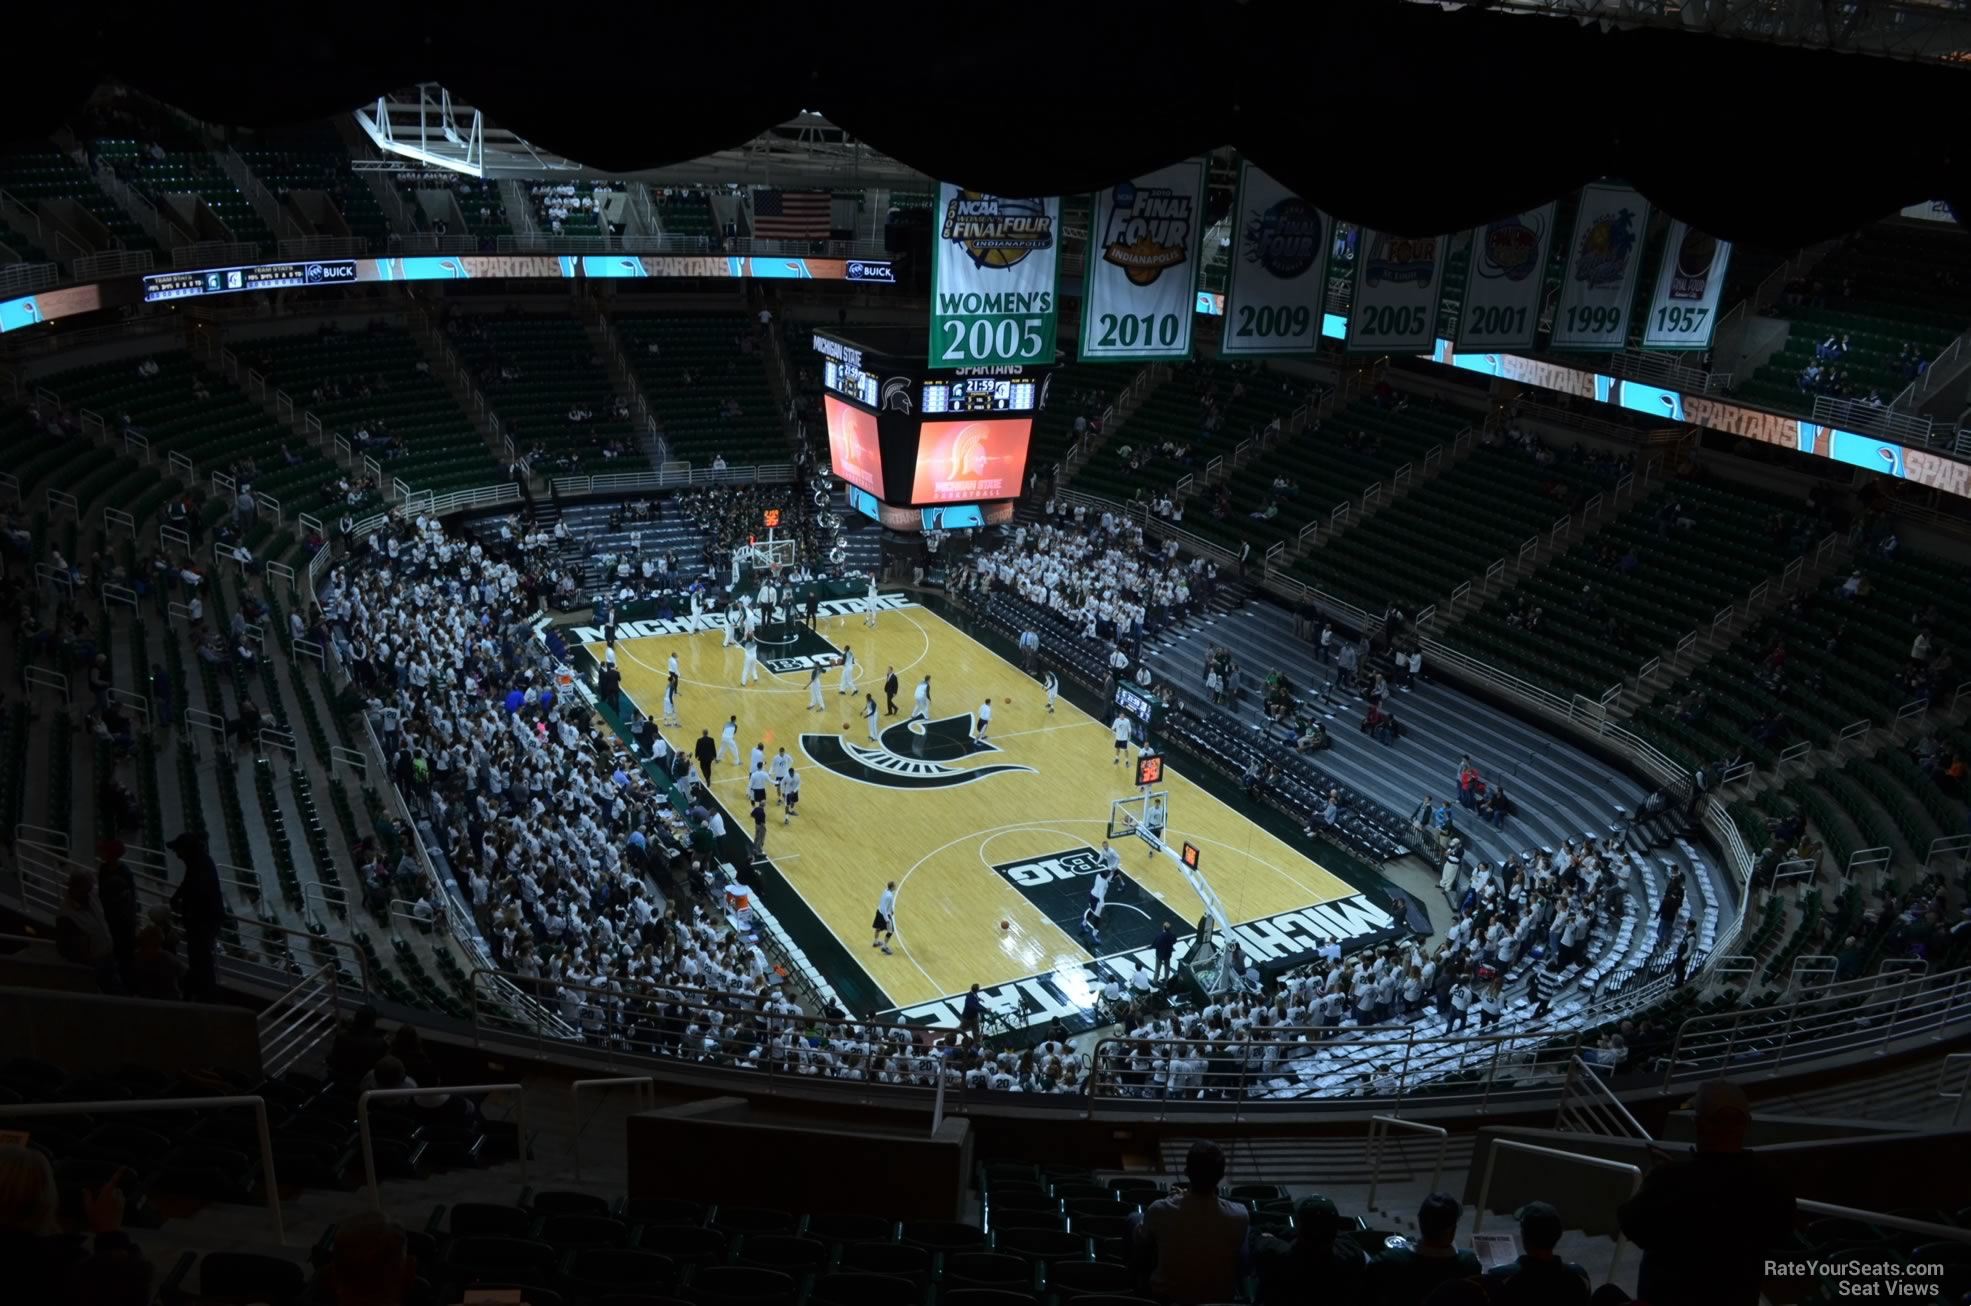 section 203, row 15 seat view  - breslin center